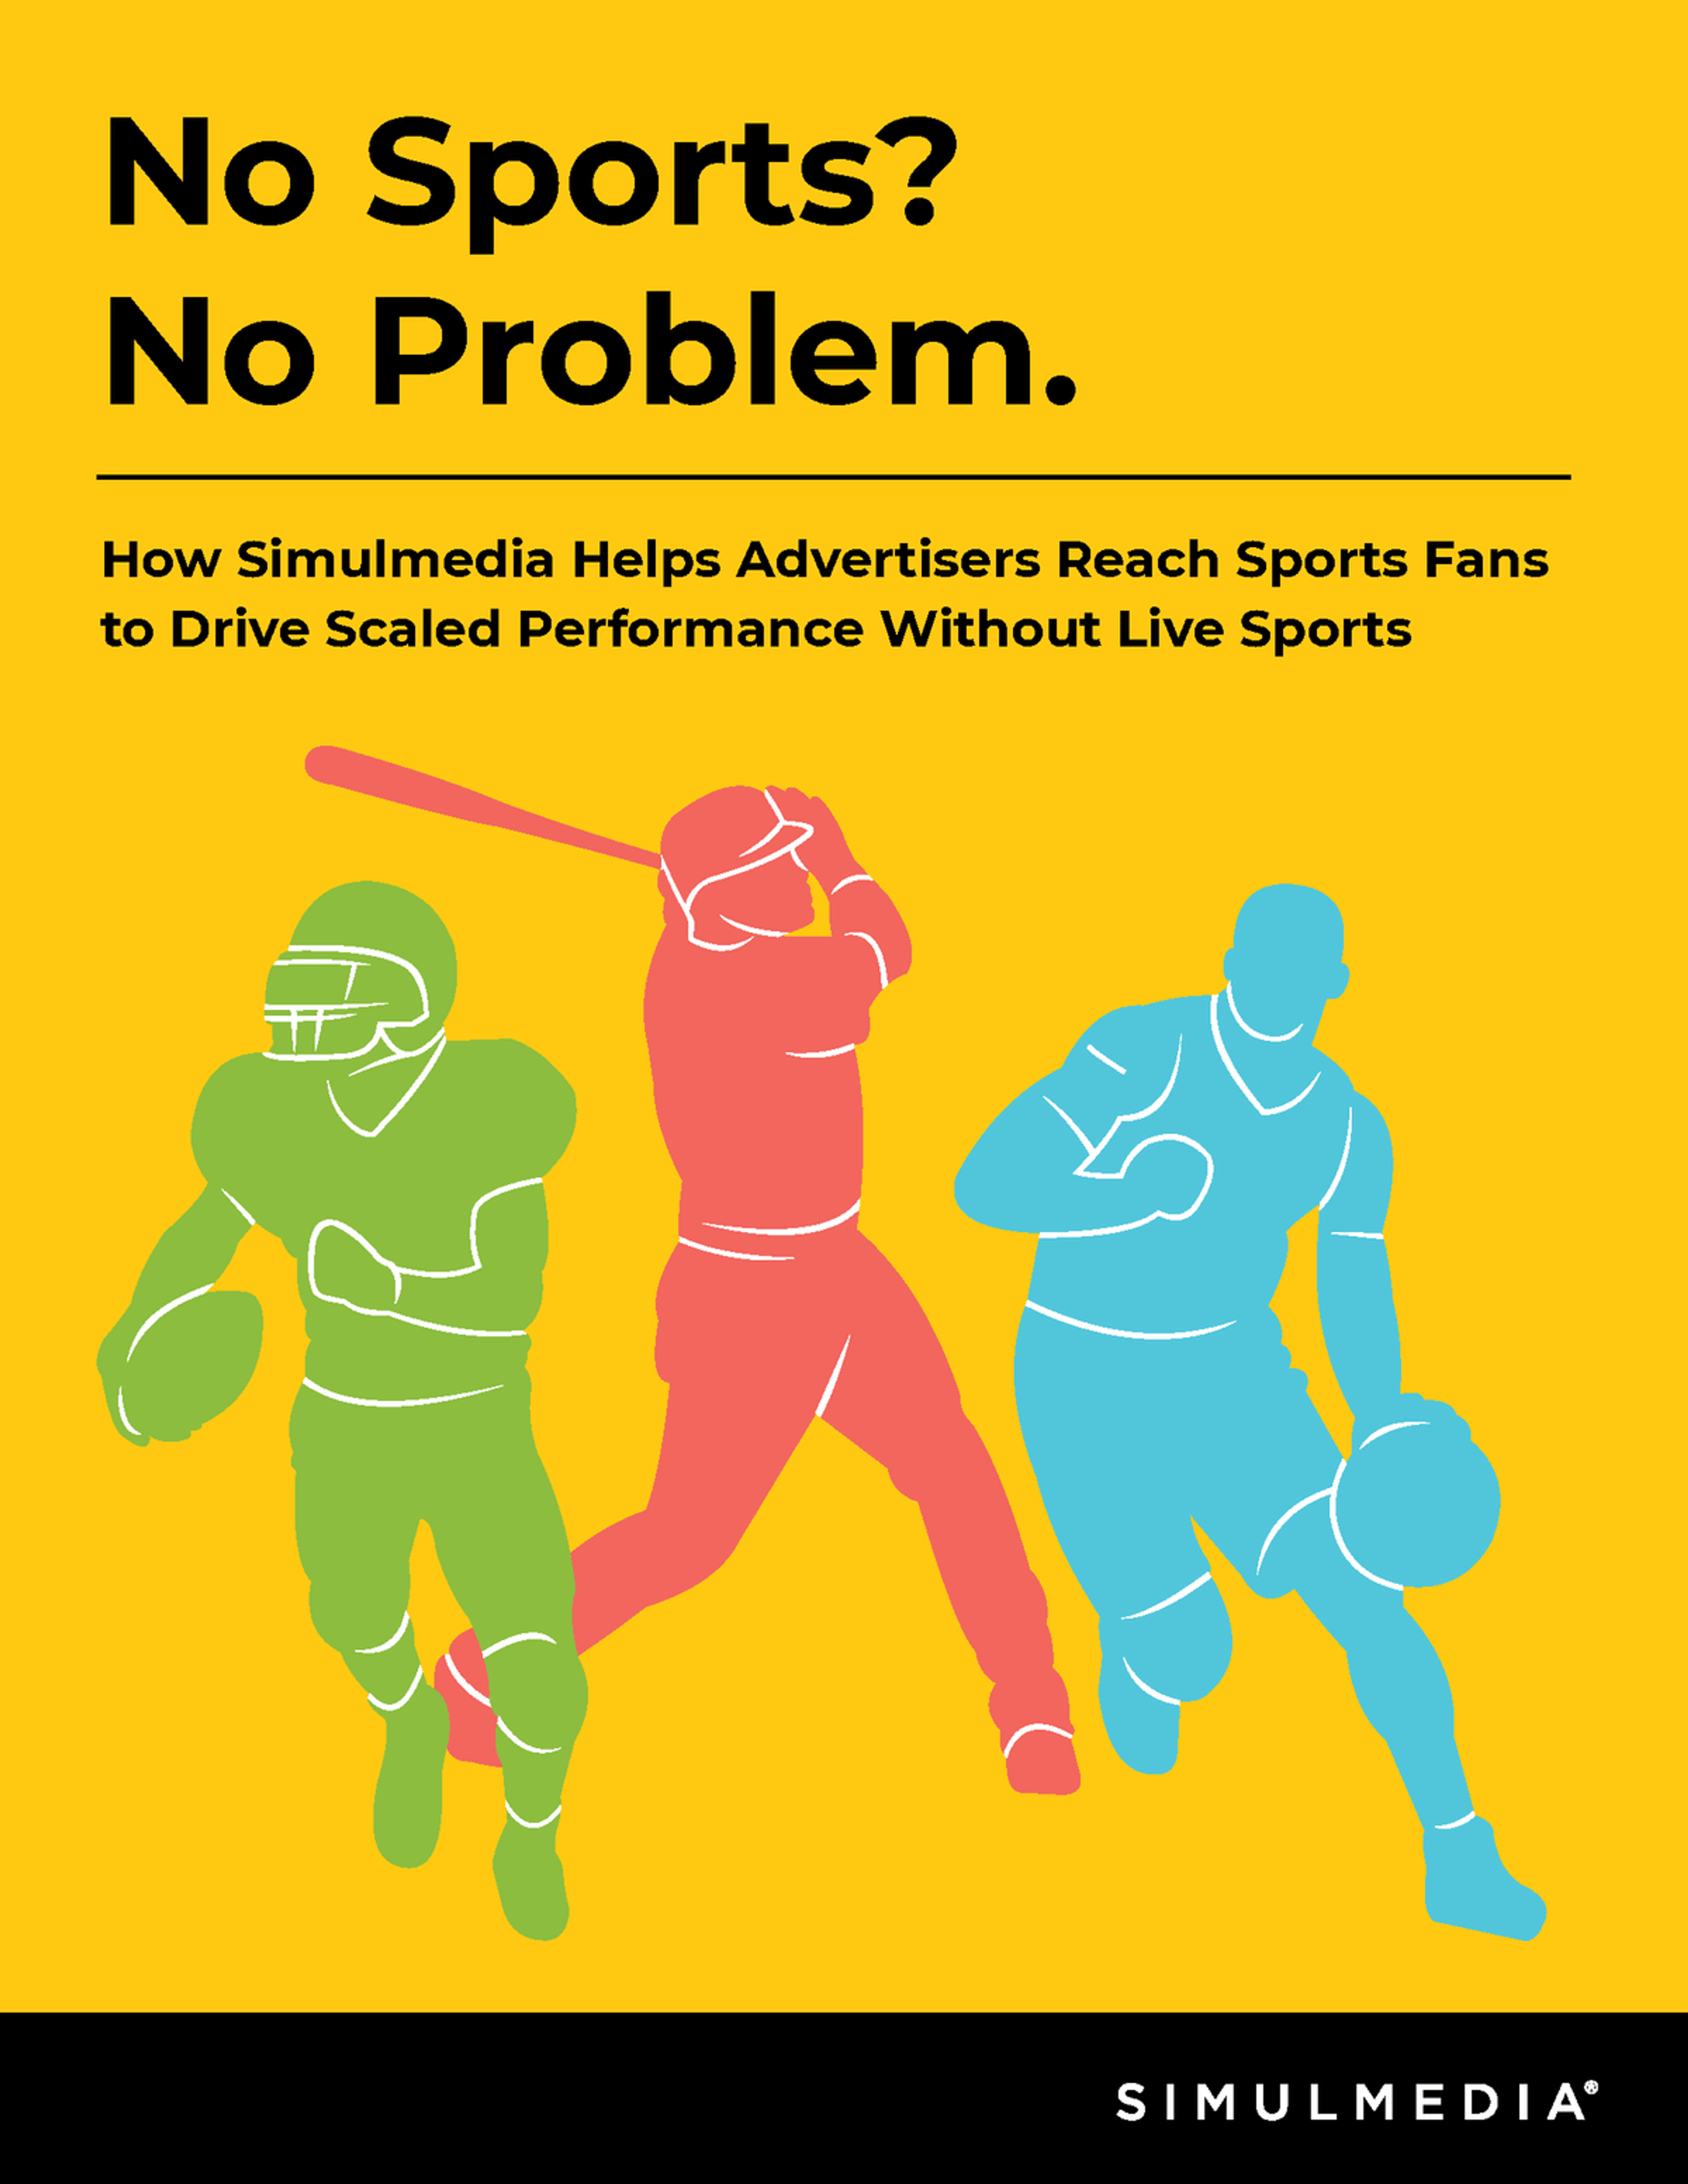 Cover of the No Sports? No Problem. whitepaper that covers how advertisers can reach sports fans across the TV landscape.